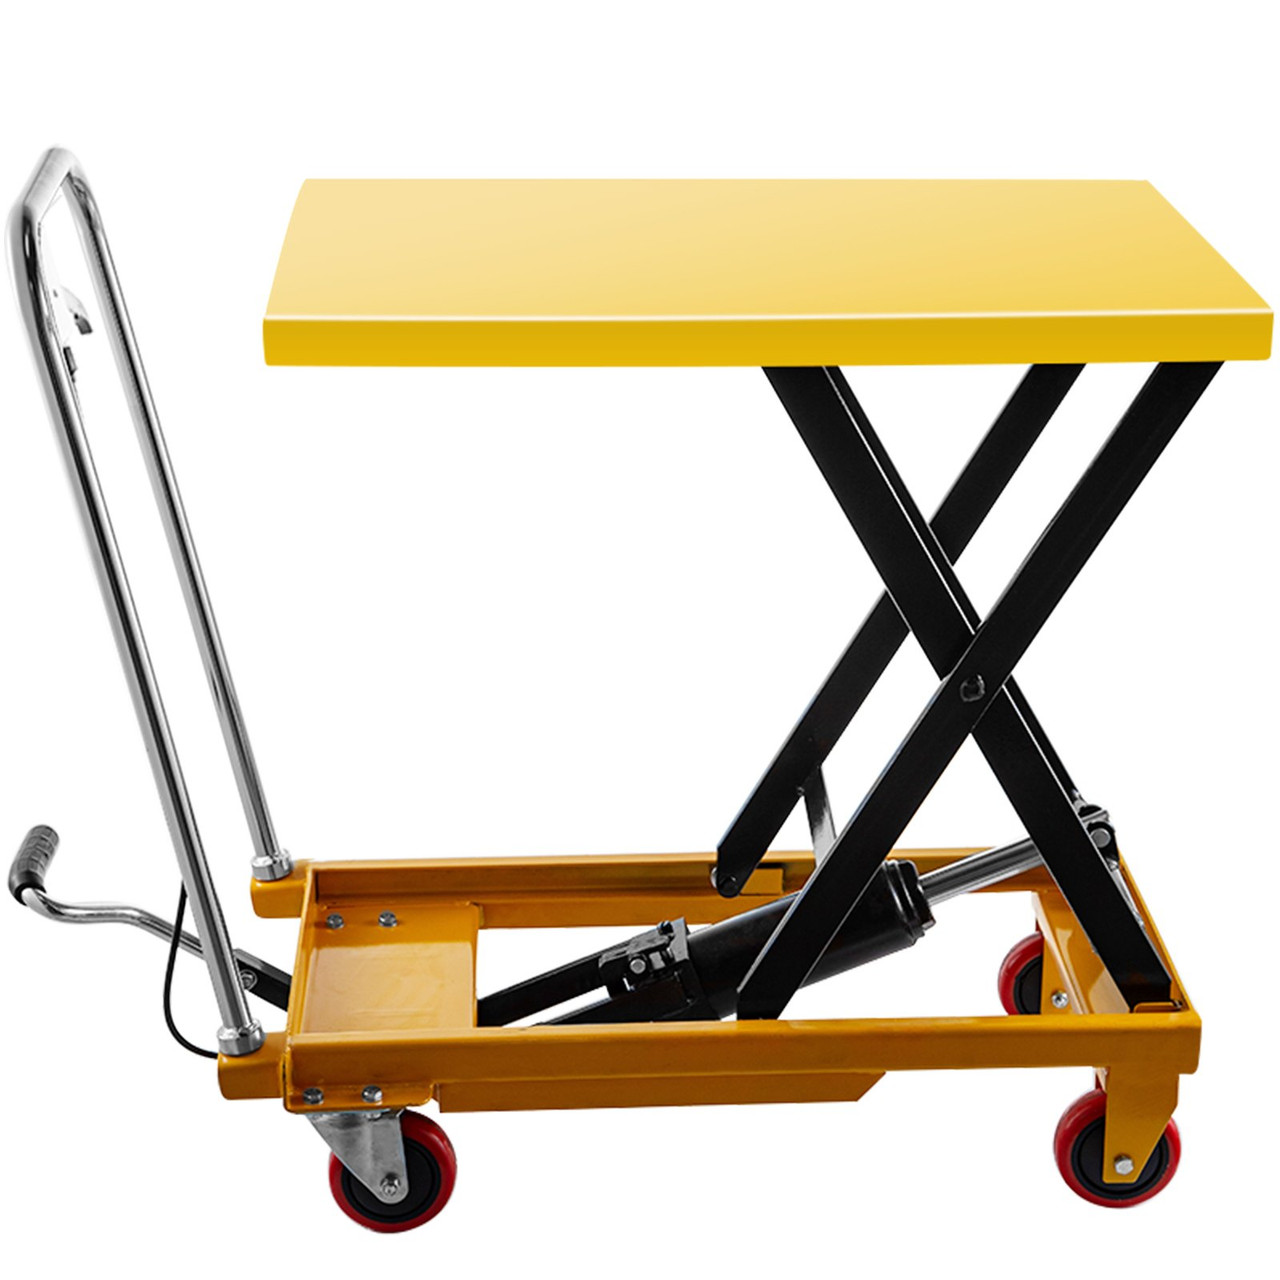 Hydraulic Lift Table Cart, 600lbs Capacity Hydraulic Scissor Cart, 28.5" Lifting Height Scissor Lift Table, Single Scissor Lift Cart w/Foot Pump, 32.1''x19.7'' Table Size, for Freight Lifting